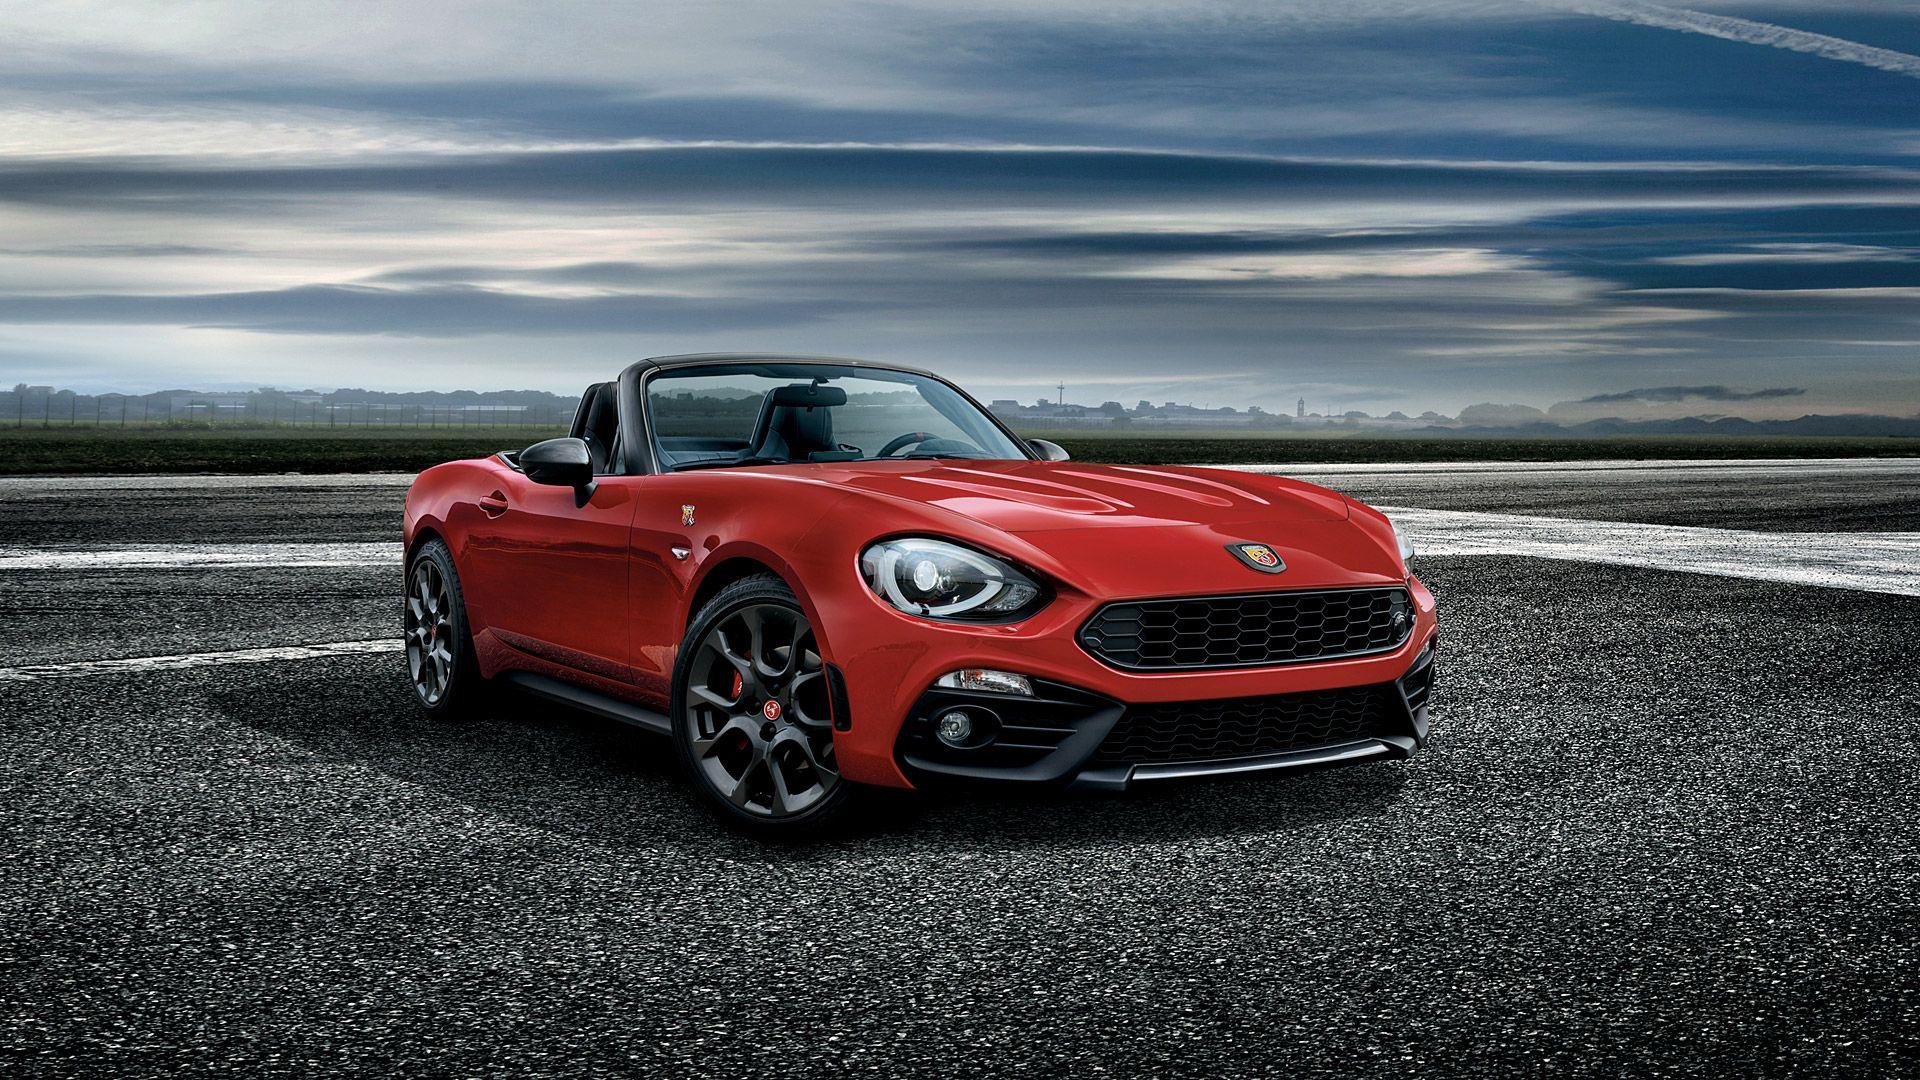 43+ Girls With Fiat 124 Spider Wallpaper free download